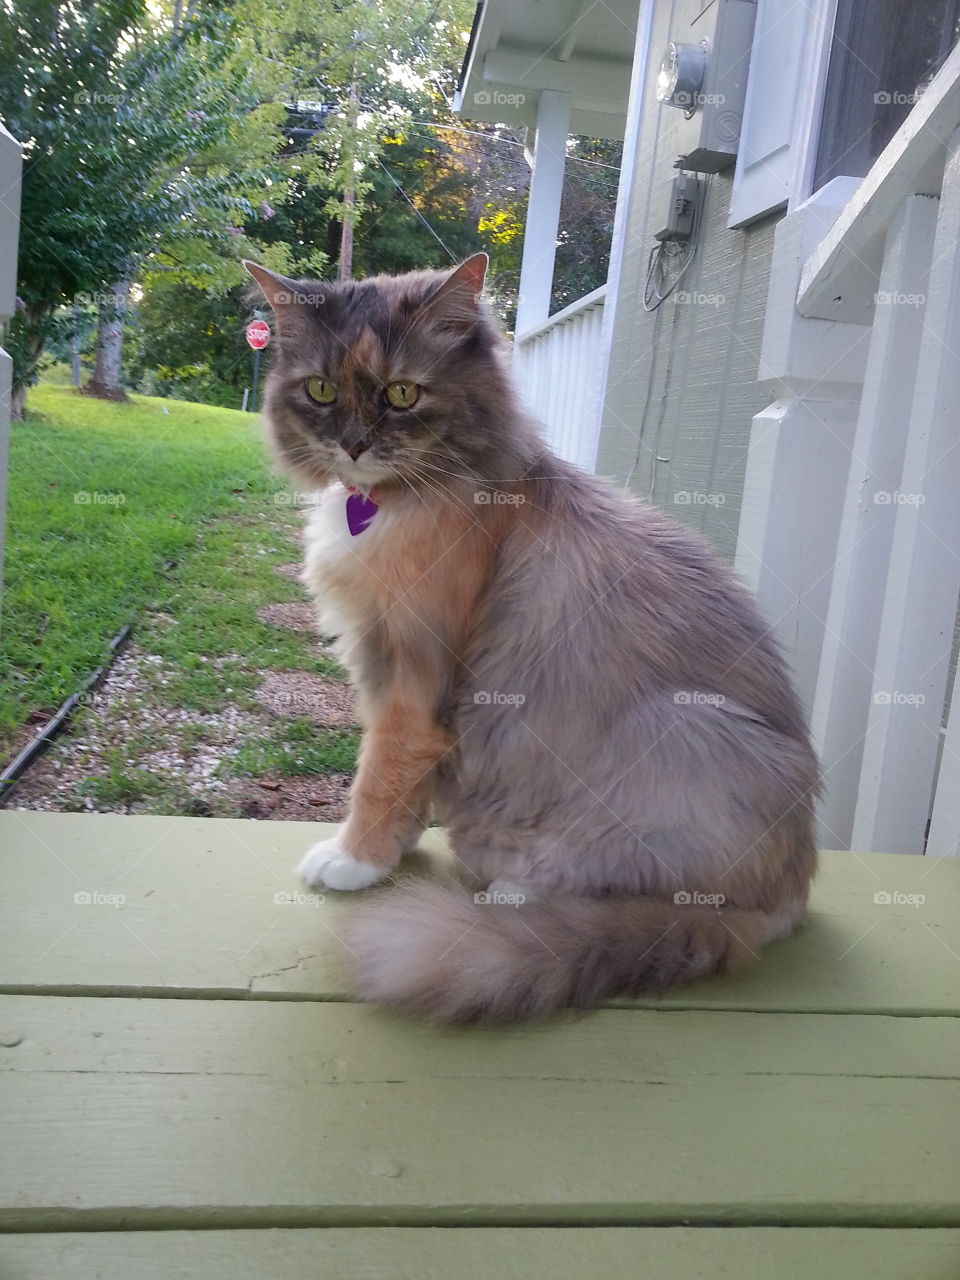 Cat on the porch. my cat Piper on the porch